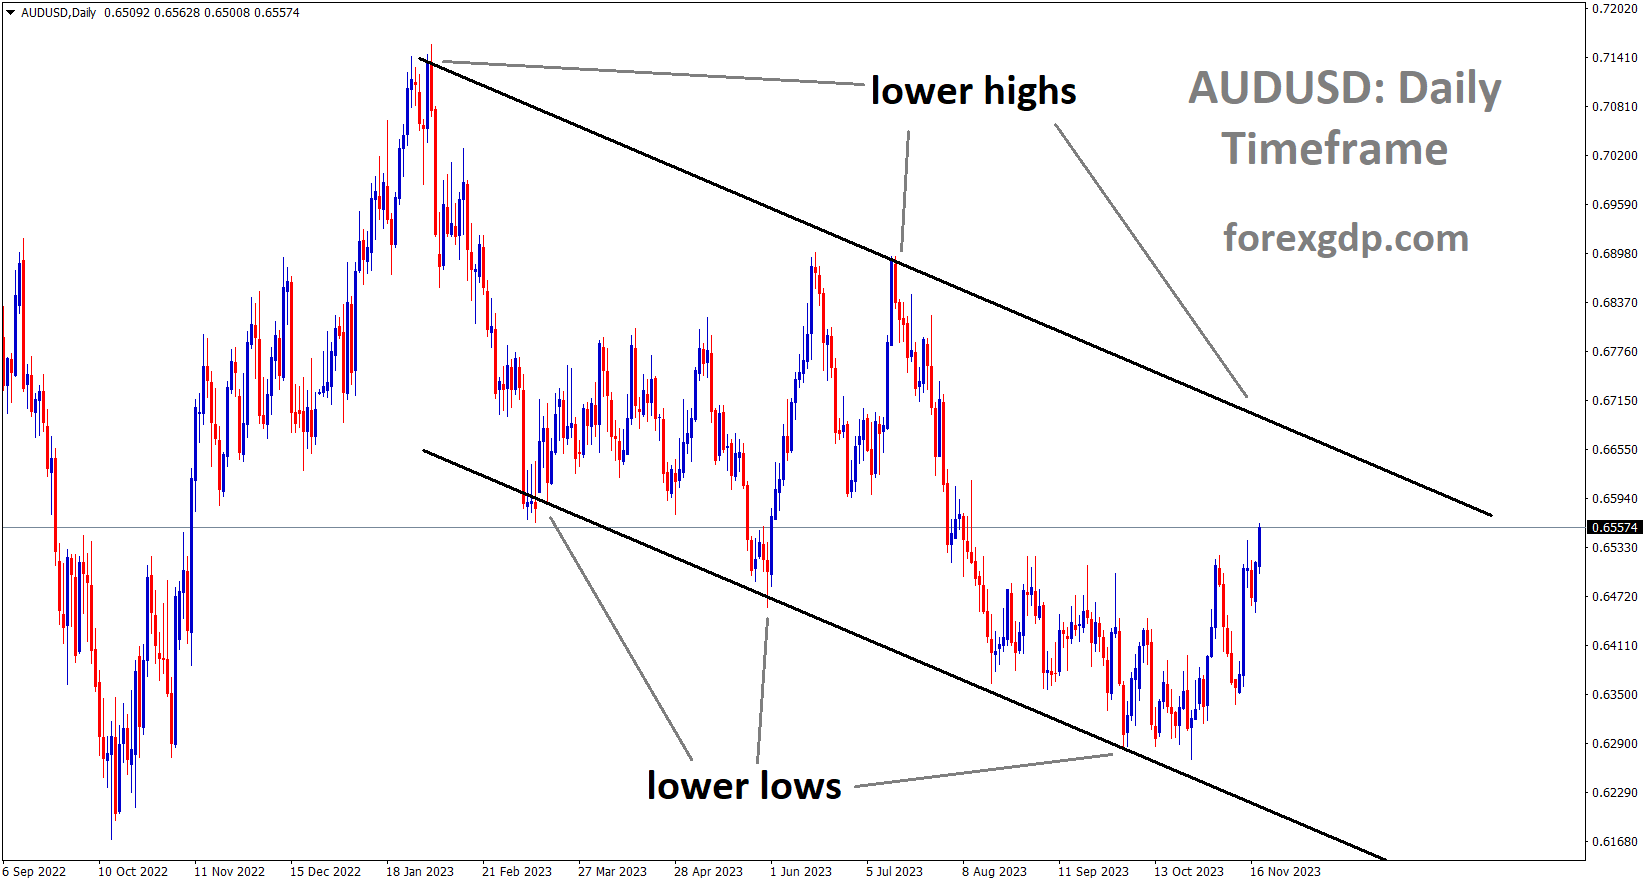 AUDUSD is moving in the Descending channel and the market has rebounded from the lower low area of the channel